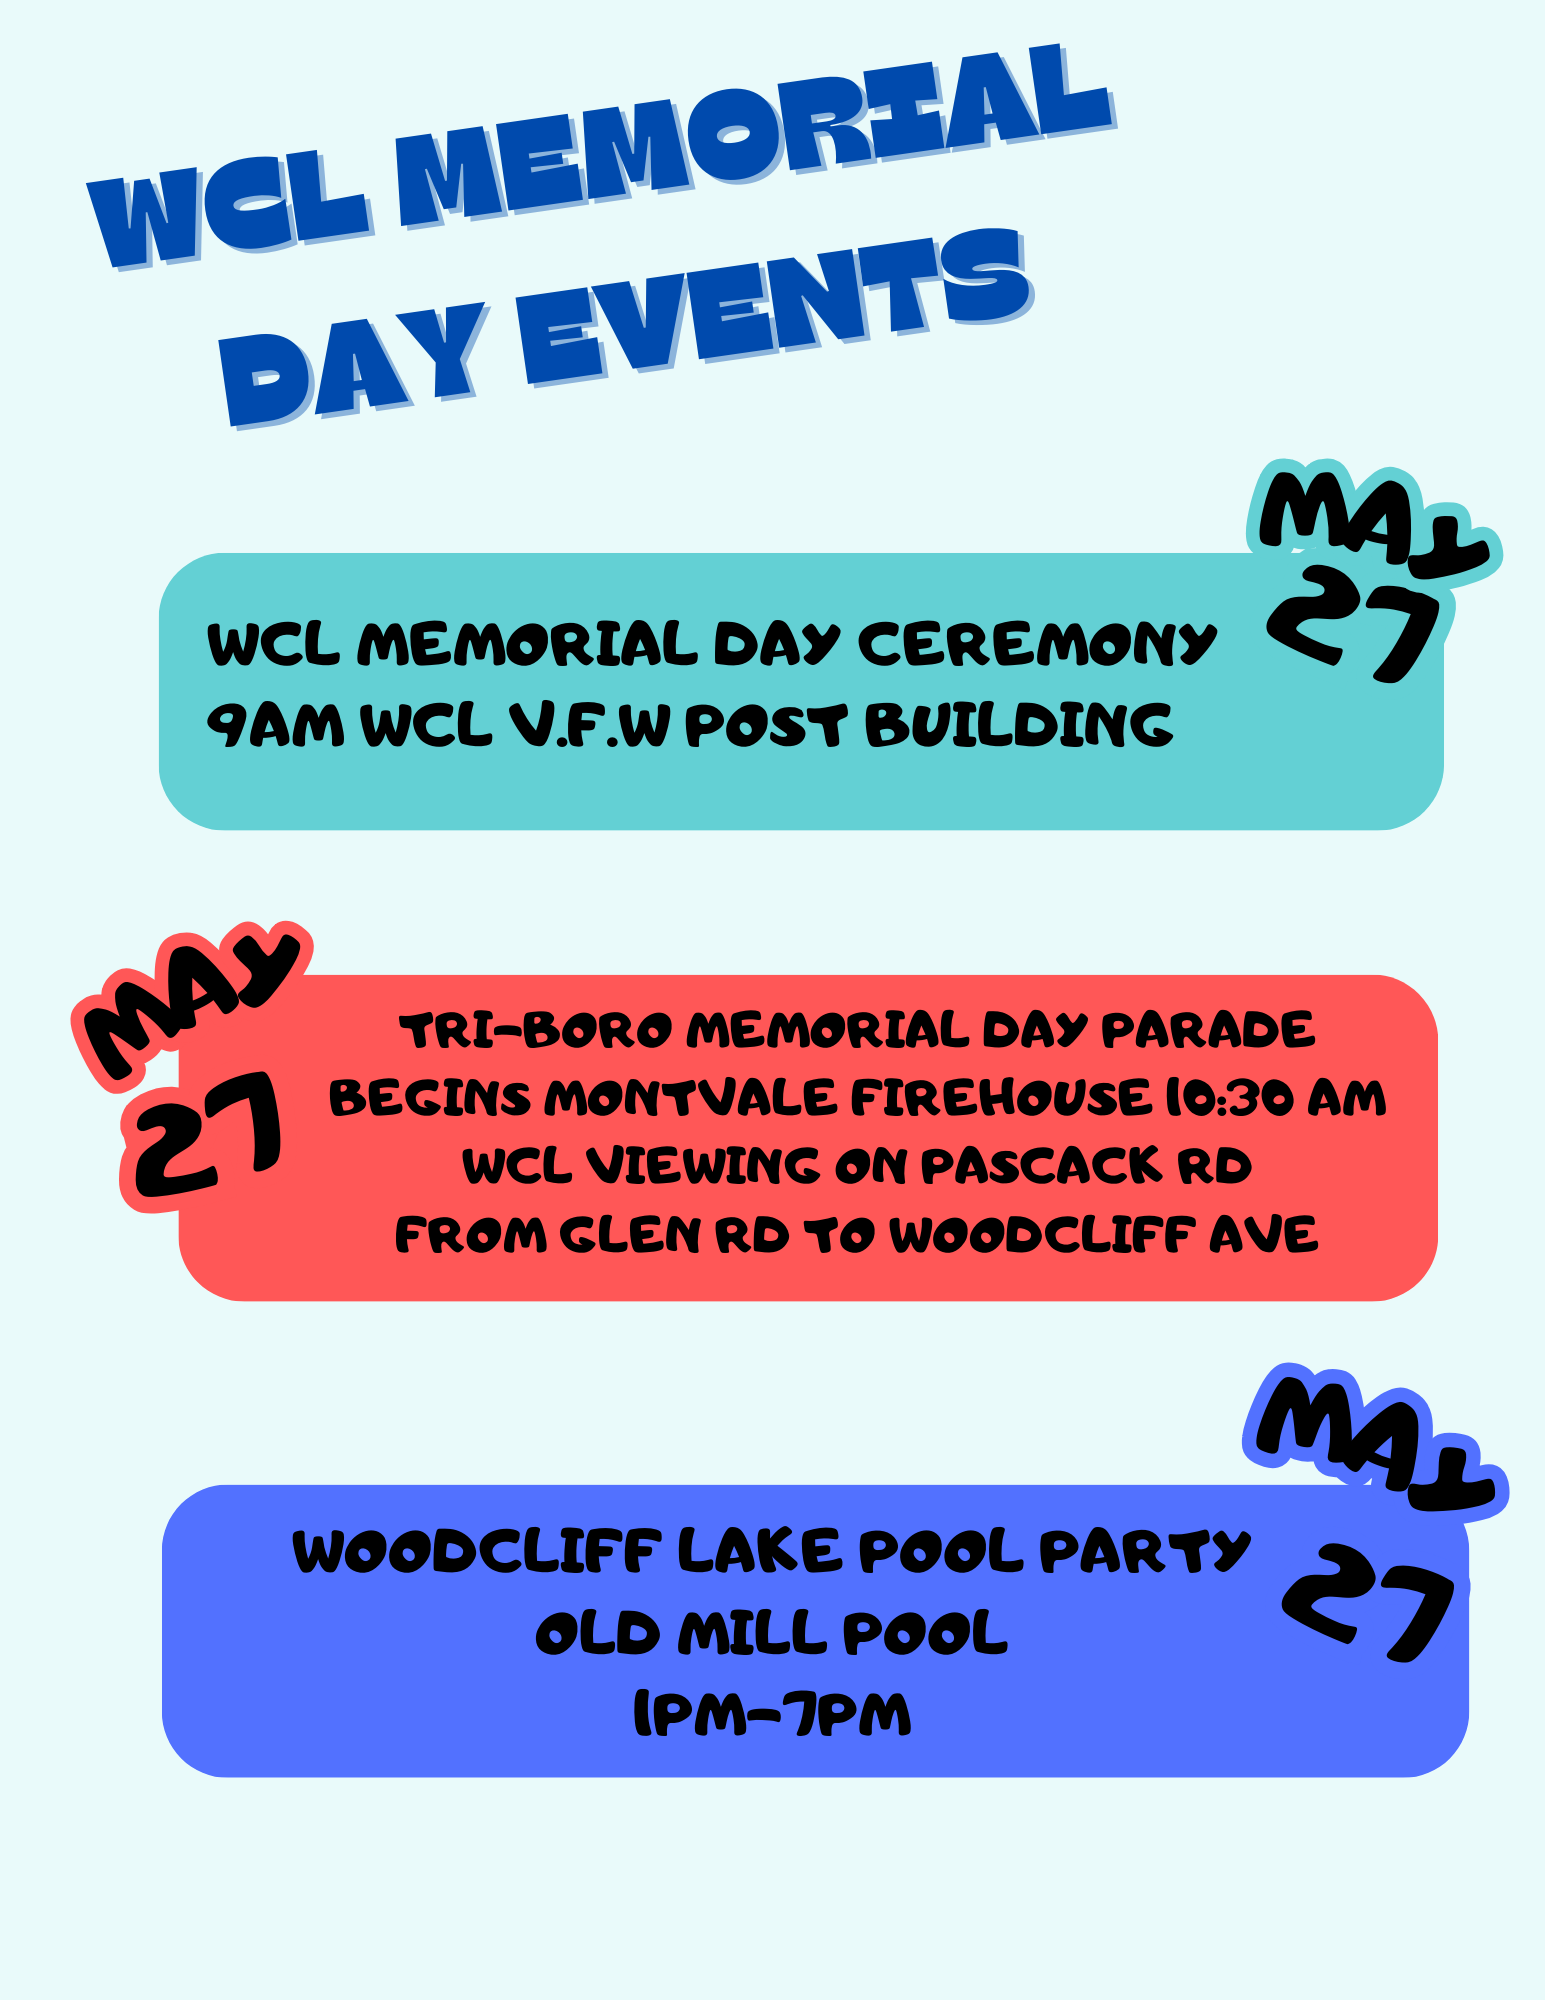 Woodcliff Lake Memorial Day Events. May 27, WCL Memorial Day Ceremony at 9AM, at the WCL V.F.W. Post Building. 10:30 AM Tri-Boro Memorial Day Parade, Begins at Montvale Firehouse at 10:30 AM. Woodcliff Lake Pool Party at Old Mill Pool from 1 PM to 7 PM.